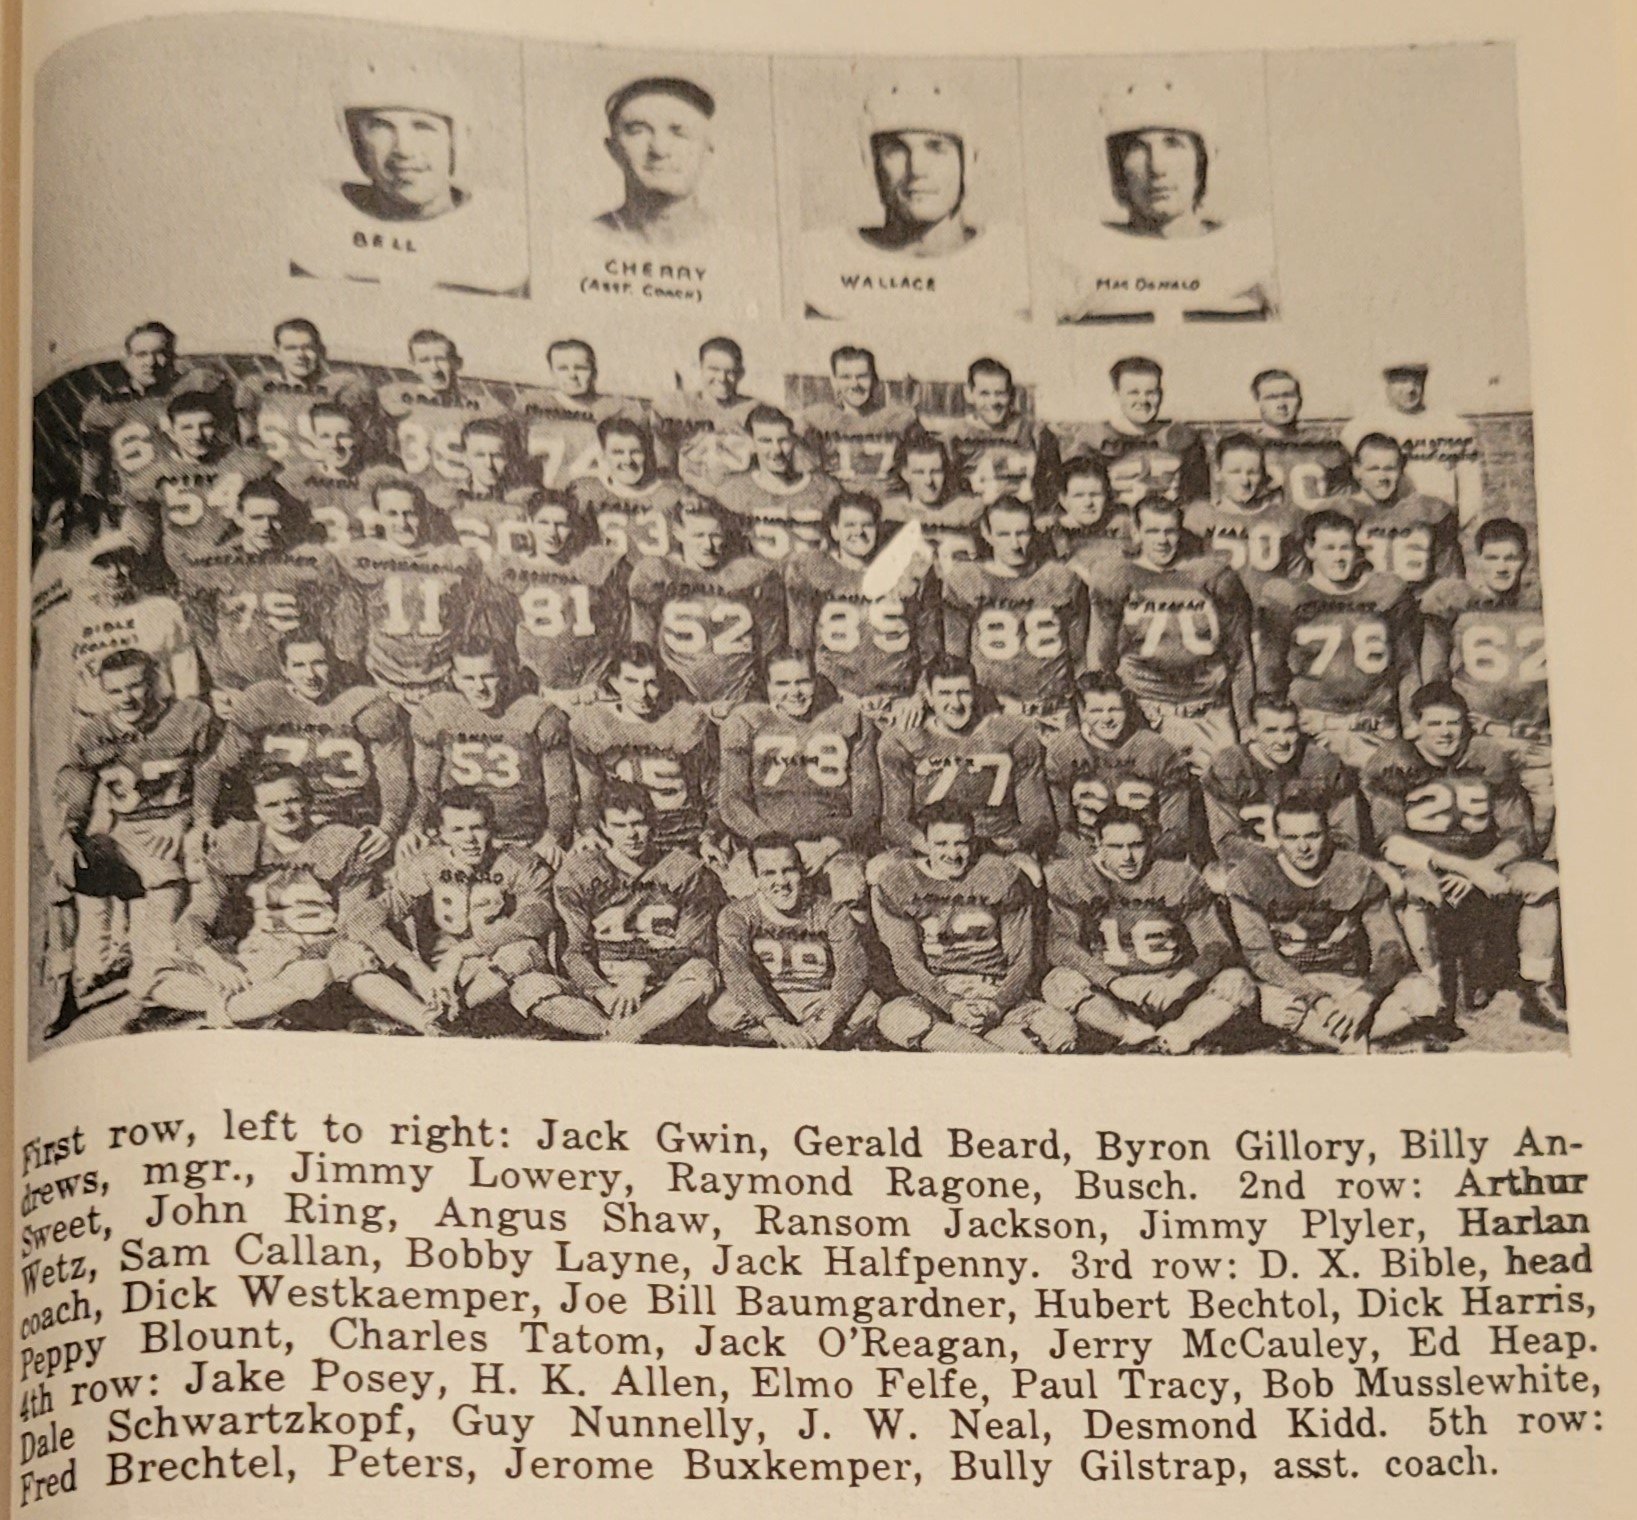 1945 Ransom Jackson 2nd row 4th from the left 